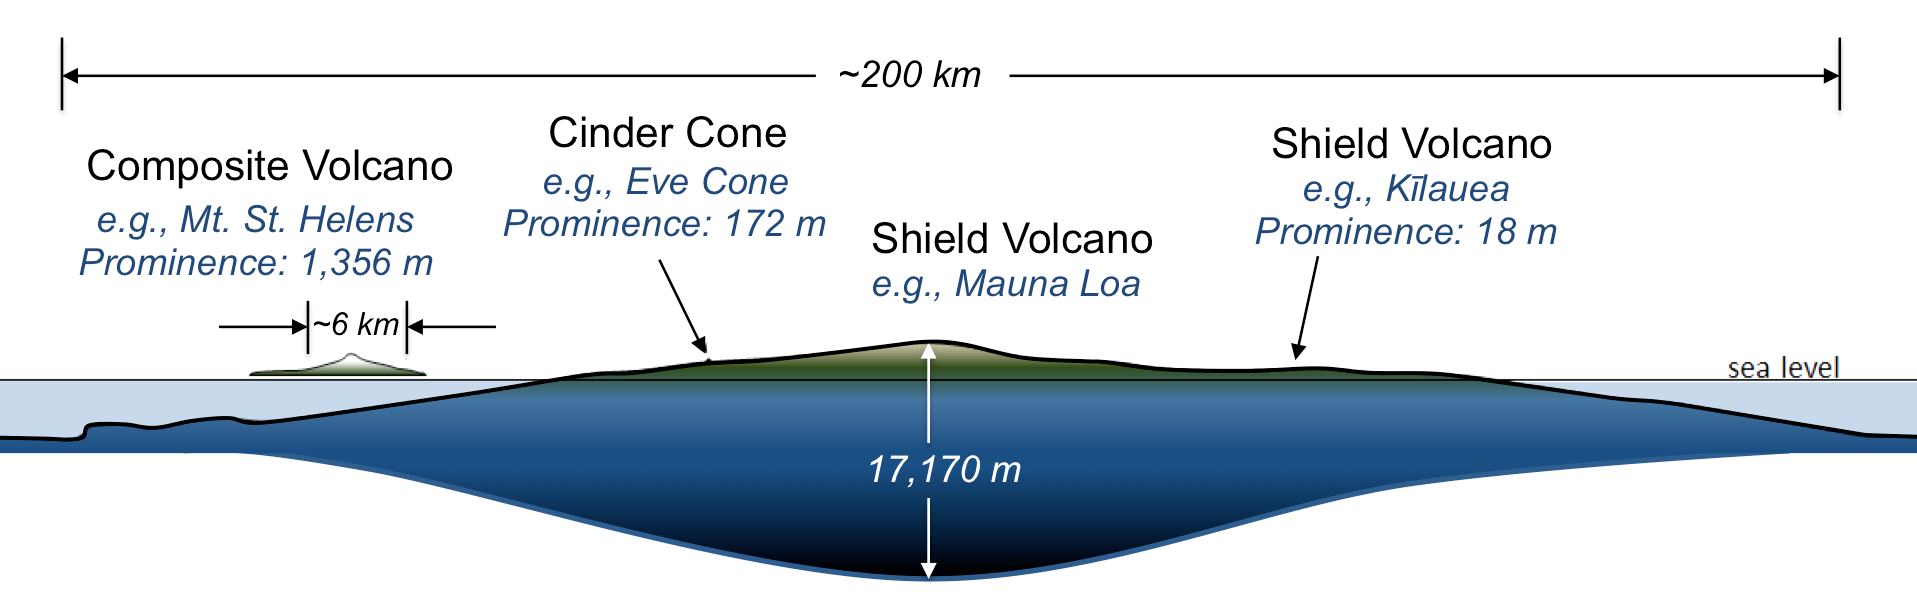 Comparison of volcano sizes and shapes. Broad, rounded shield volcanoes are the largest, followed by cone-shaped composite volcanoes. Straight-sided cinder cones are the smallest.